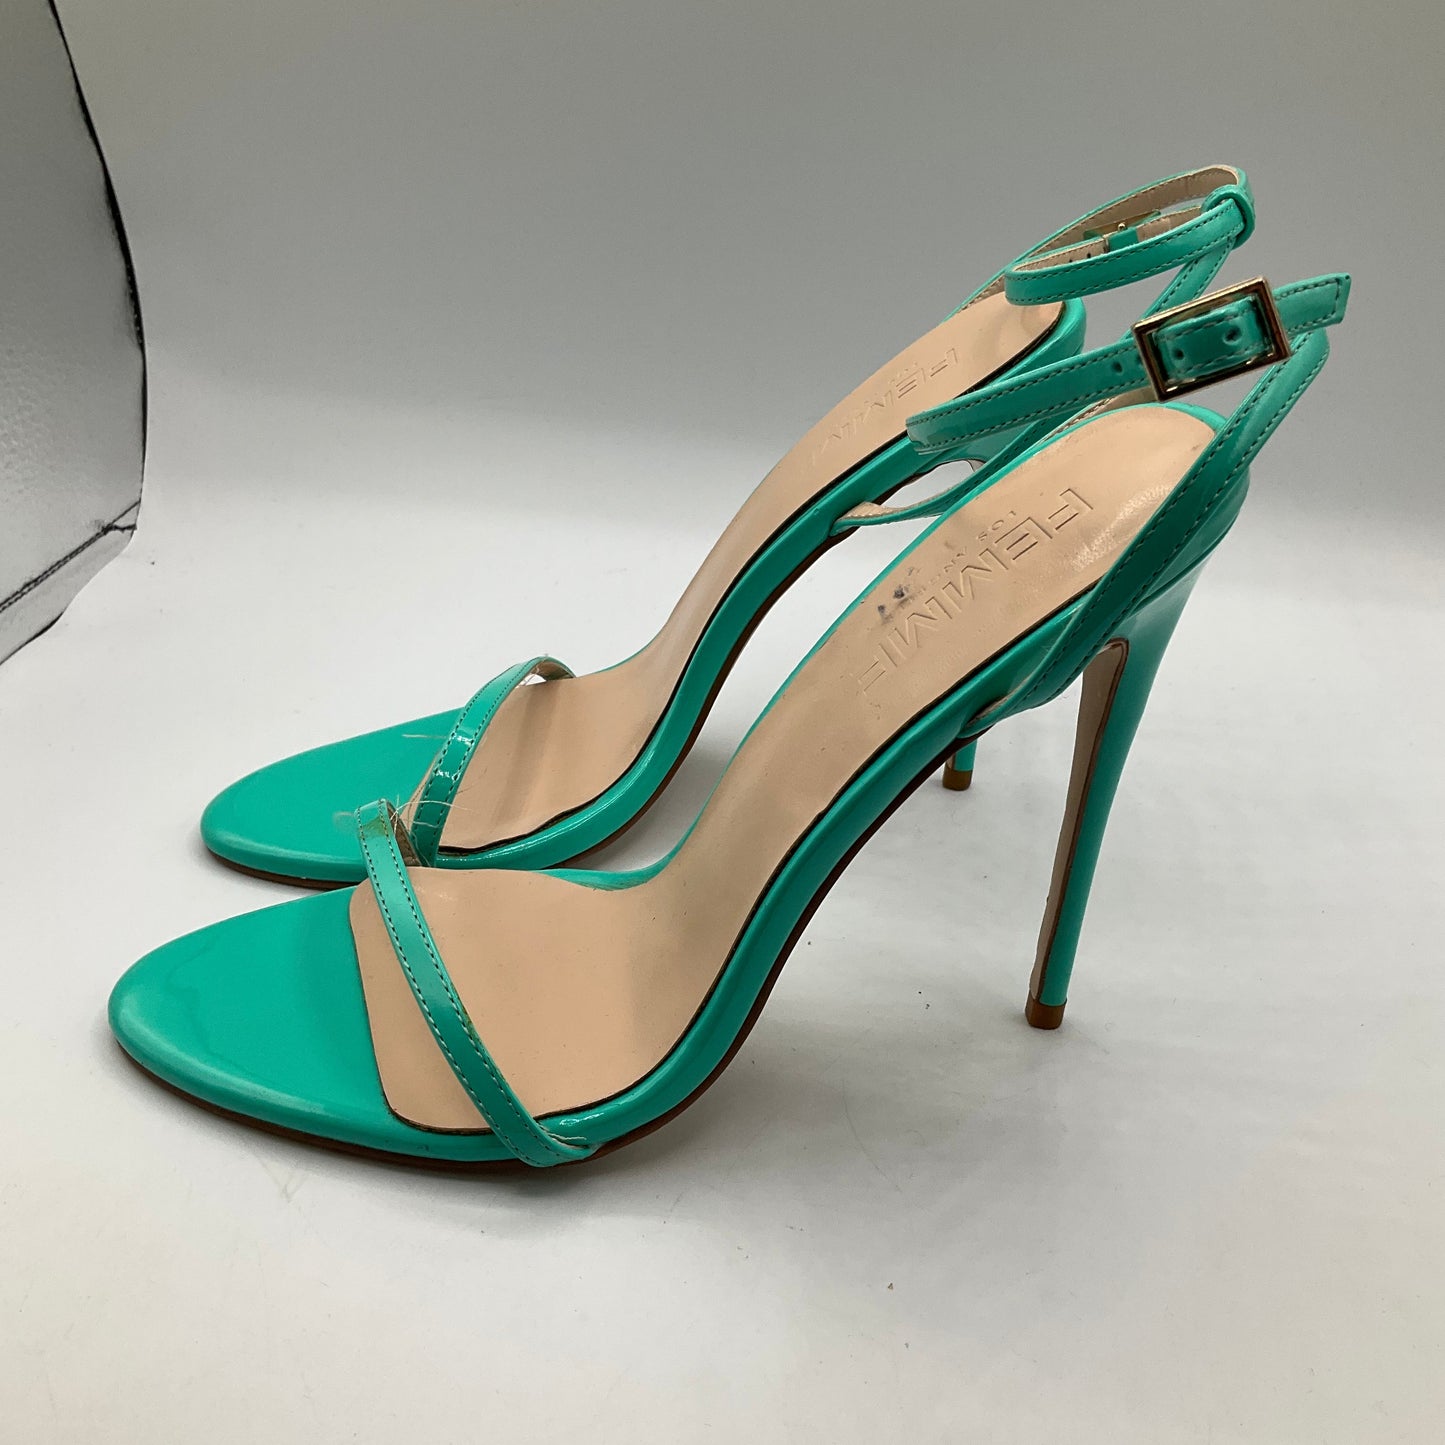 Shoes Heels Stiletto By Cma  Size: 8.5